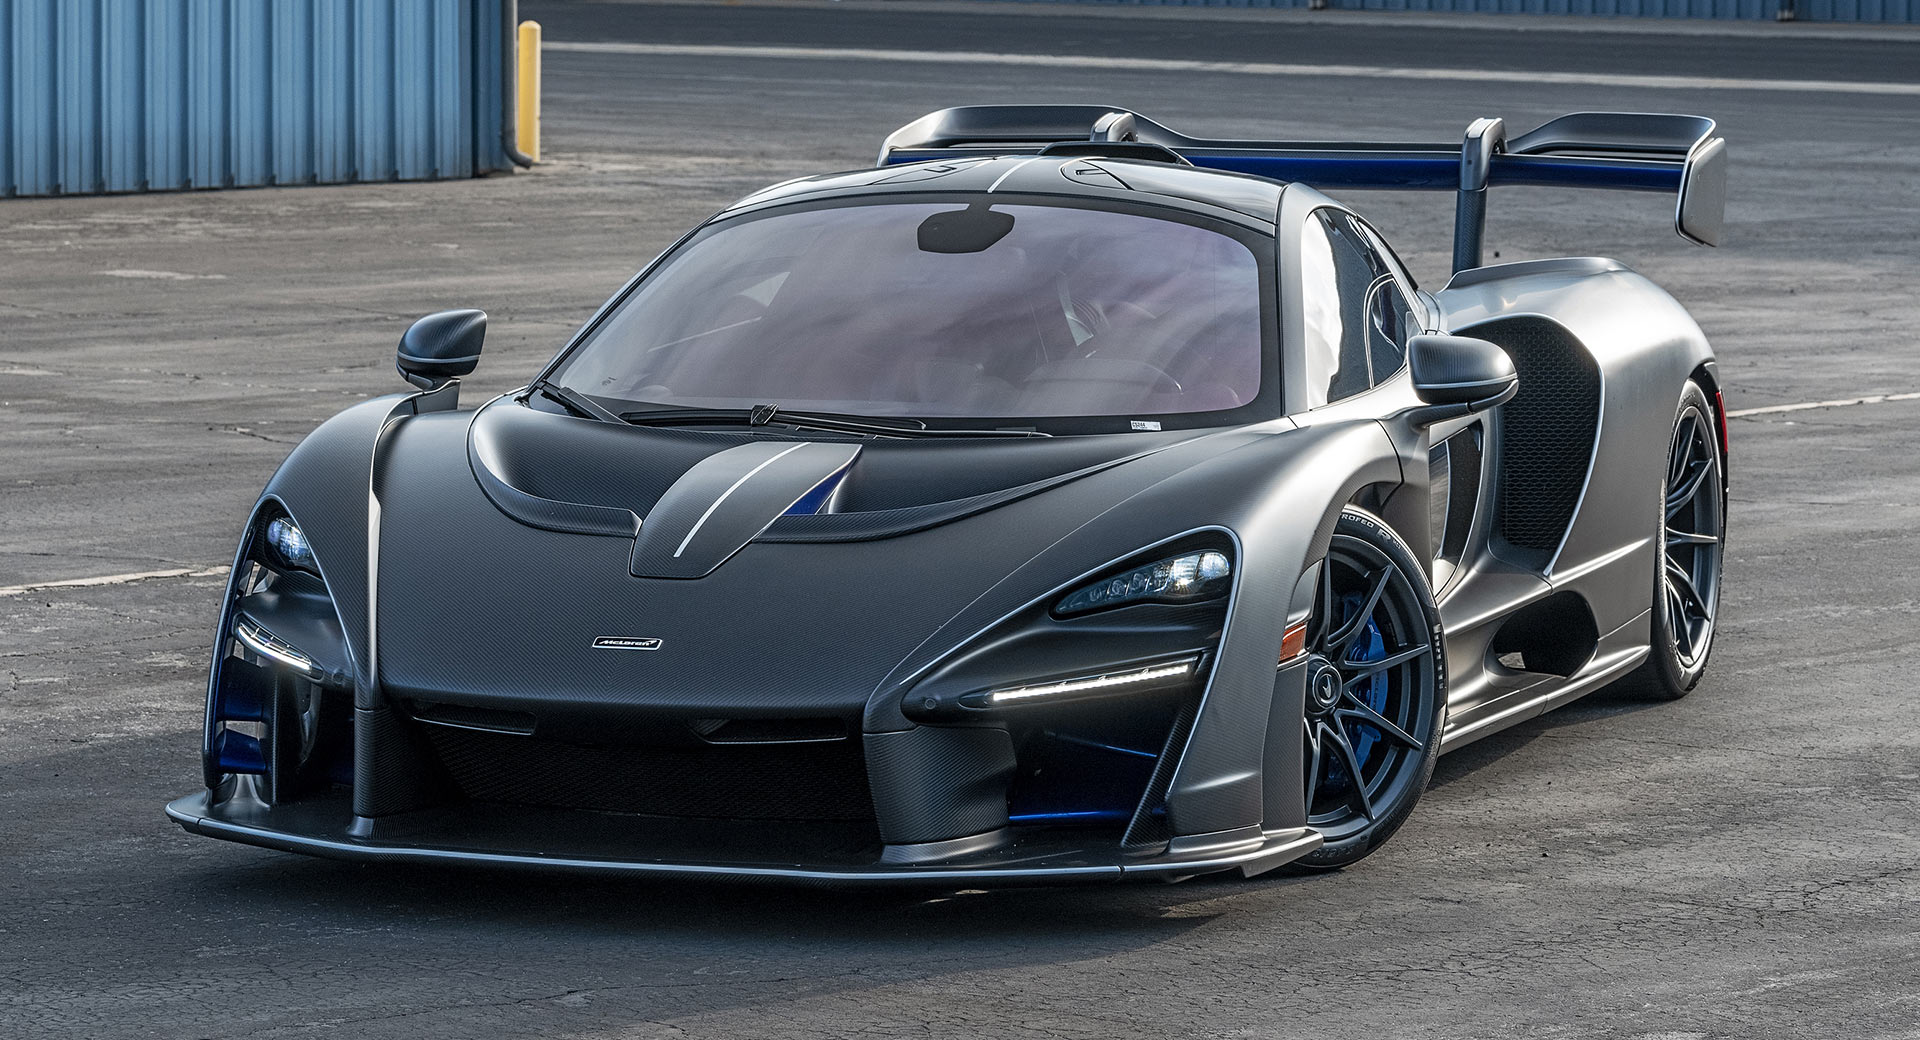 Matte Carbon Mclaren Senna With 410 Miles On The Odo Has Over 360000